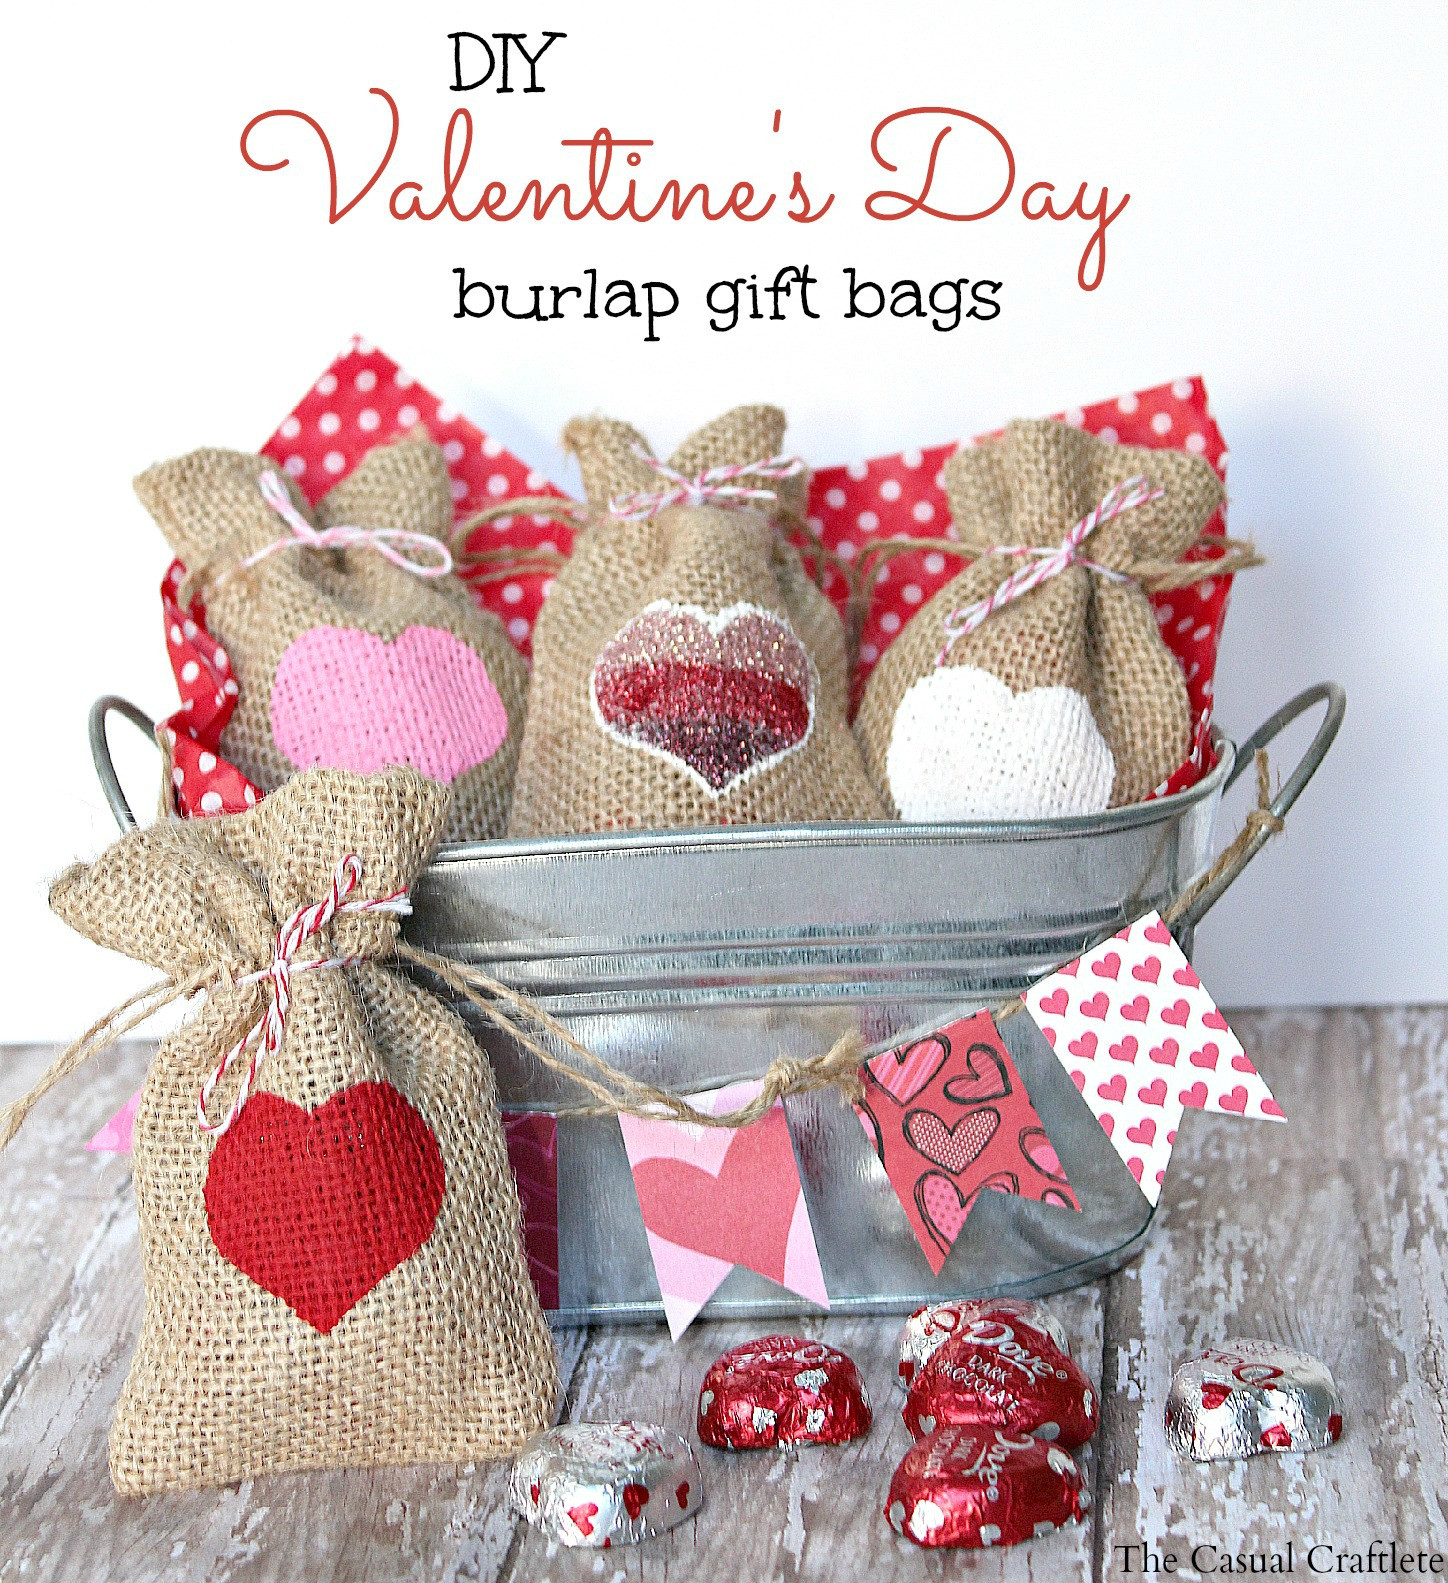 Valentines Day Photo Gift Ideas
 DIY Valentine s Day Burlap Gift Bags